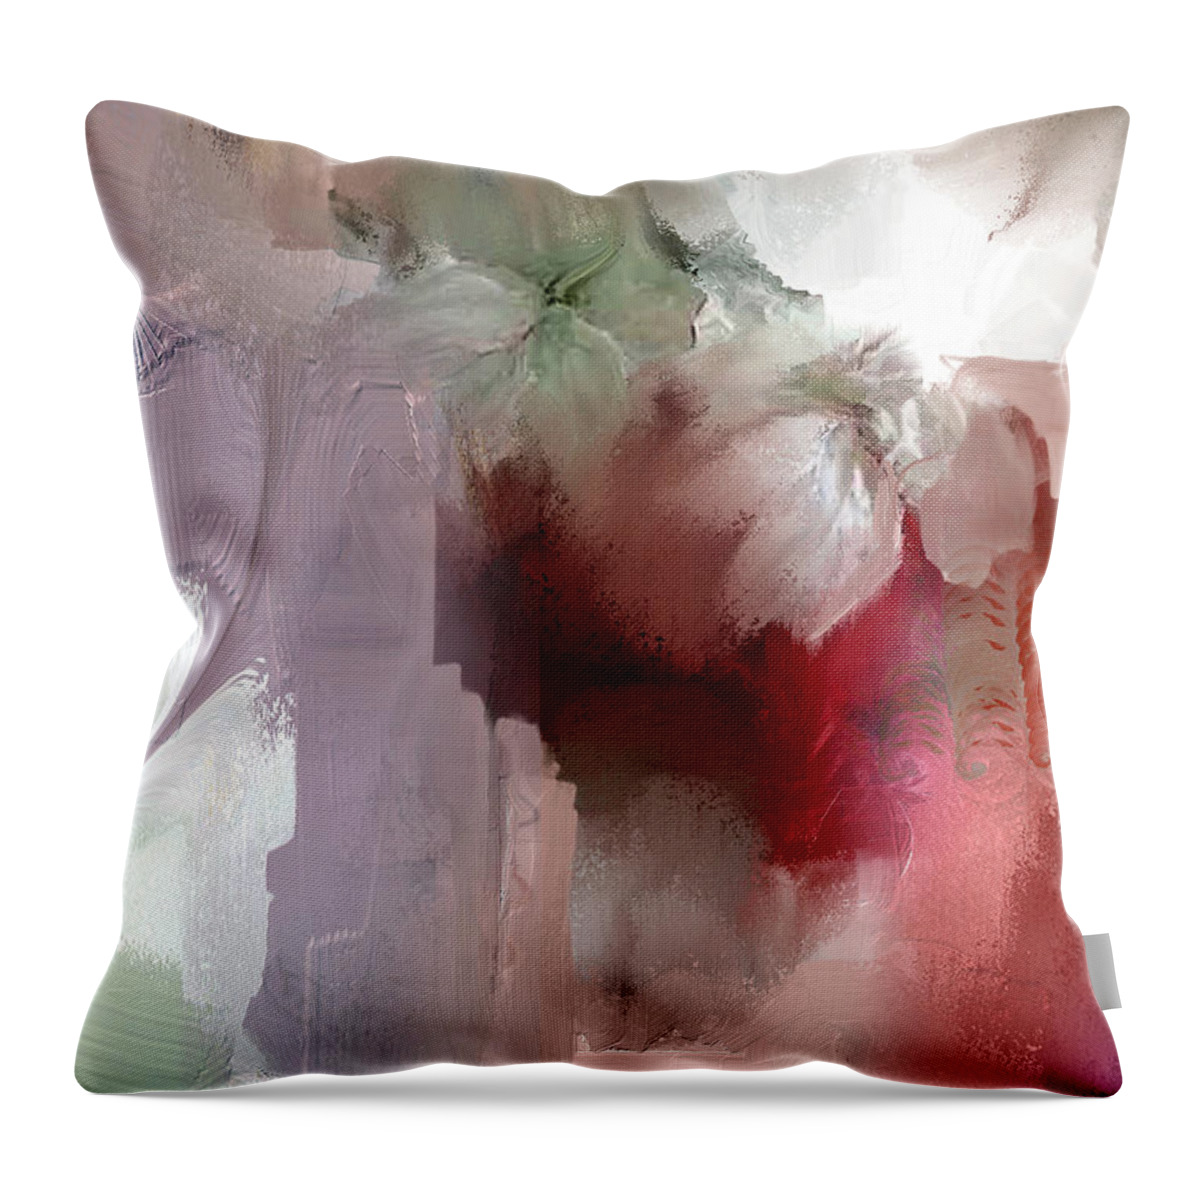  Abstract Throw Pillow featuring the mixed media Purple Glow by Davina Nicholas